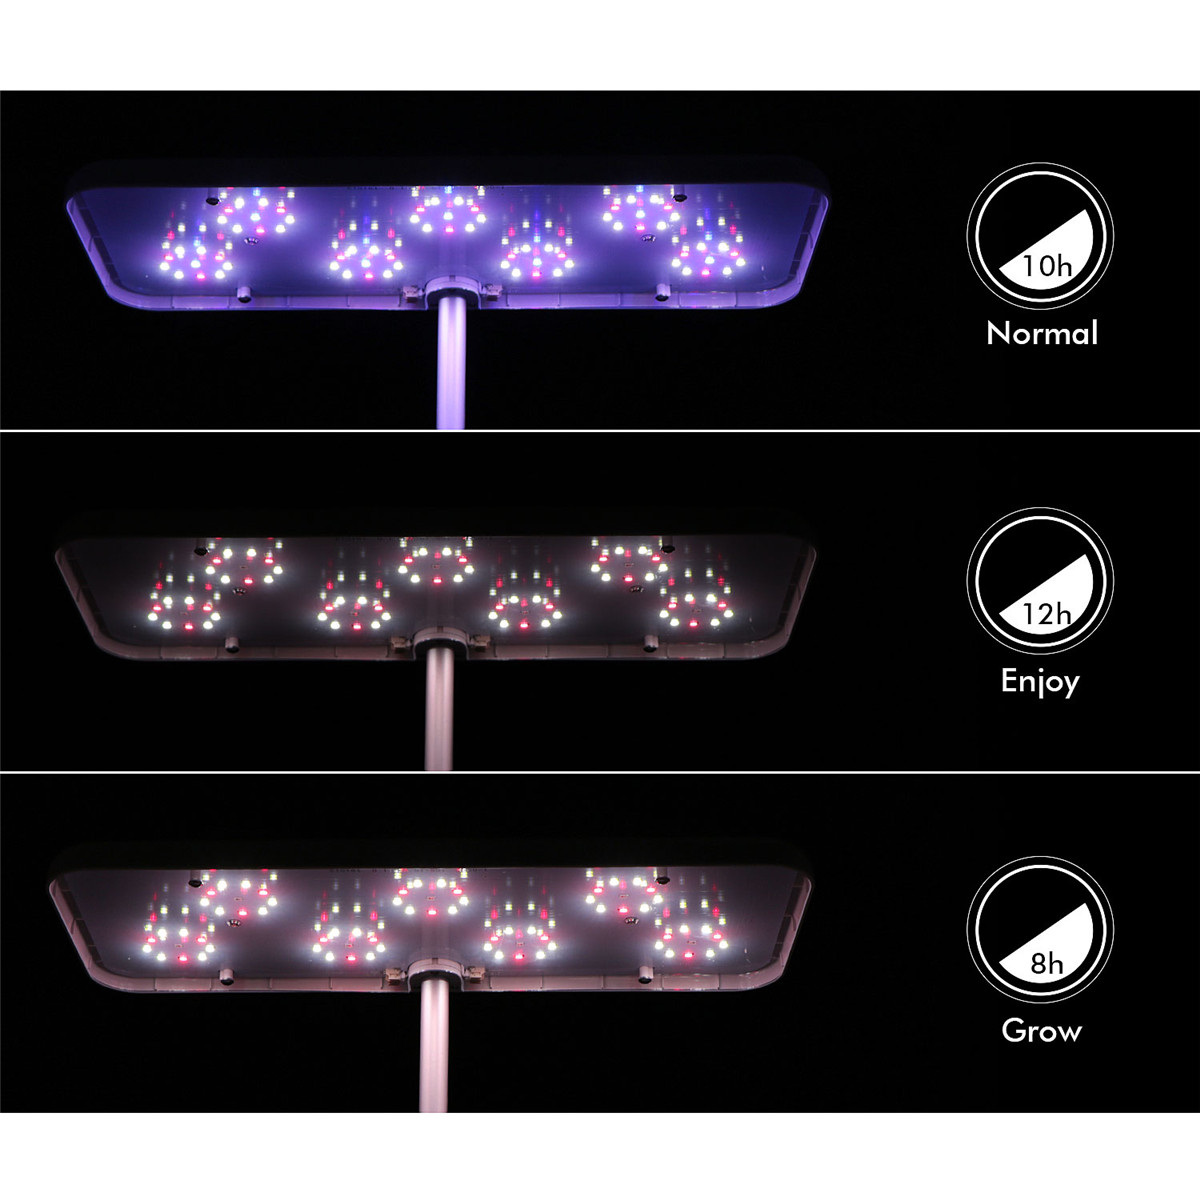 35W-Indoor-Plant-Hydroponics-Grow-Light-LED-Garden-Light-For-Plants-Flowers-Seedling-Cultivation-1570166-4